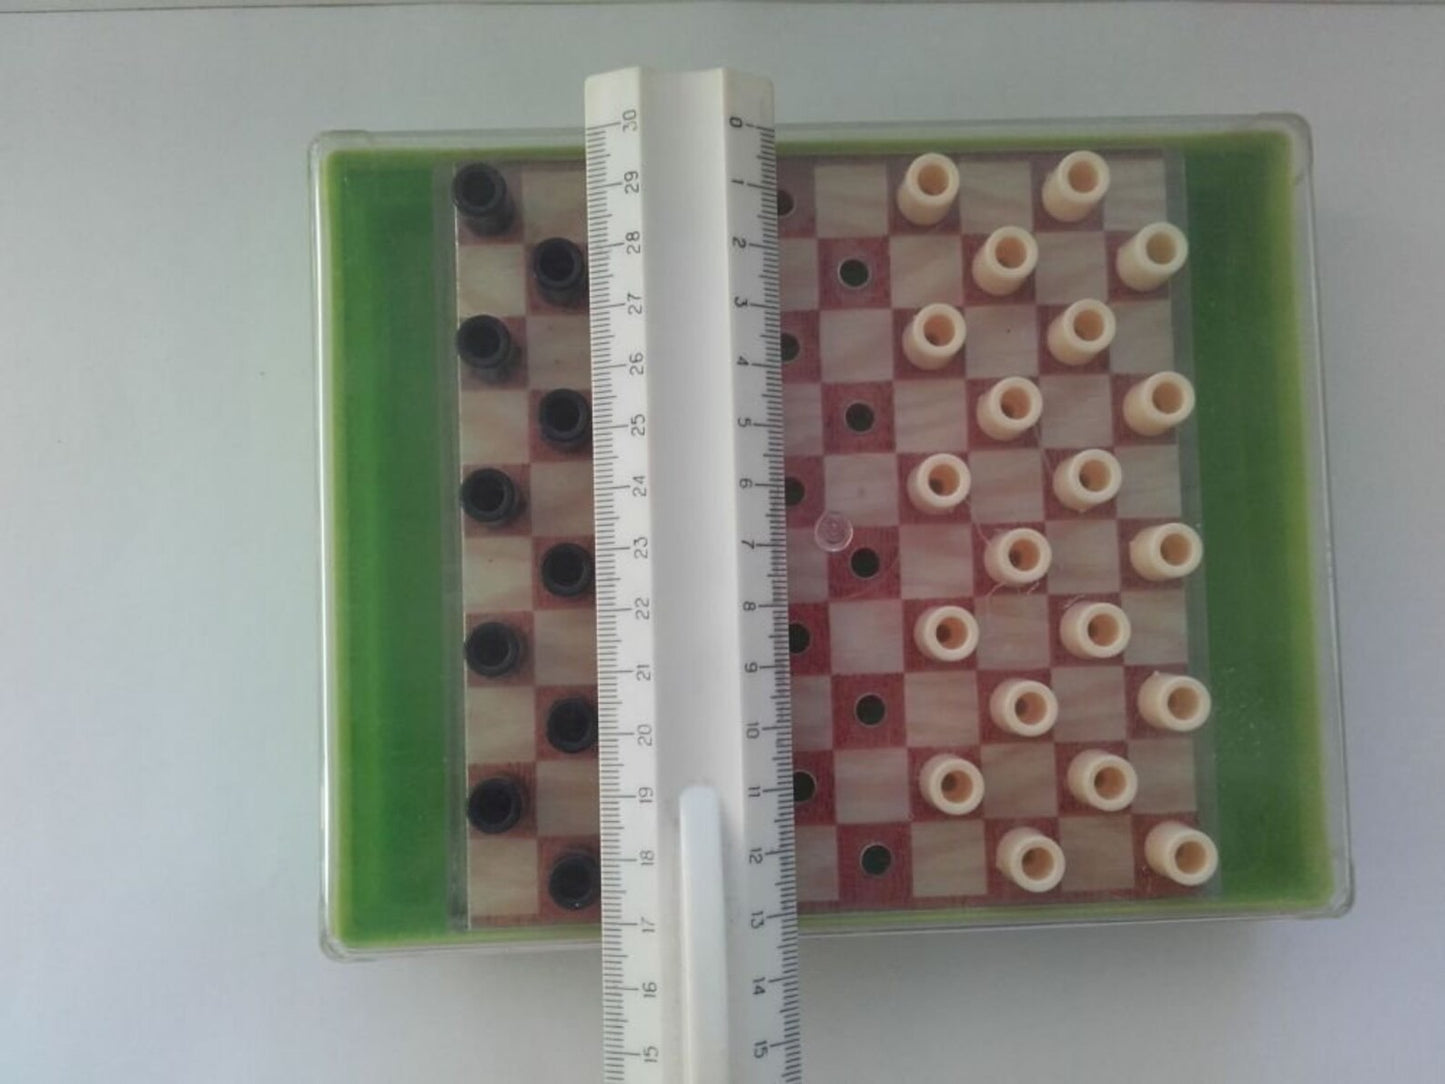 Draughts Checkers board game - Mini Checkers Set - Travel Board Game set - Made in USSR - 1970s